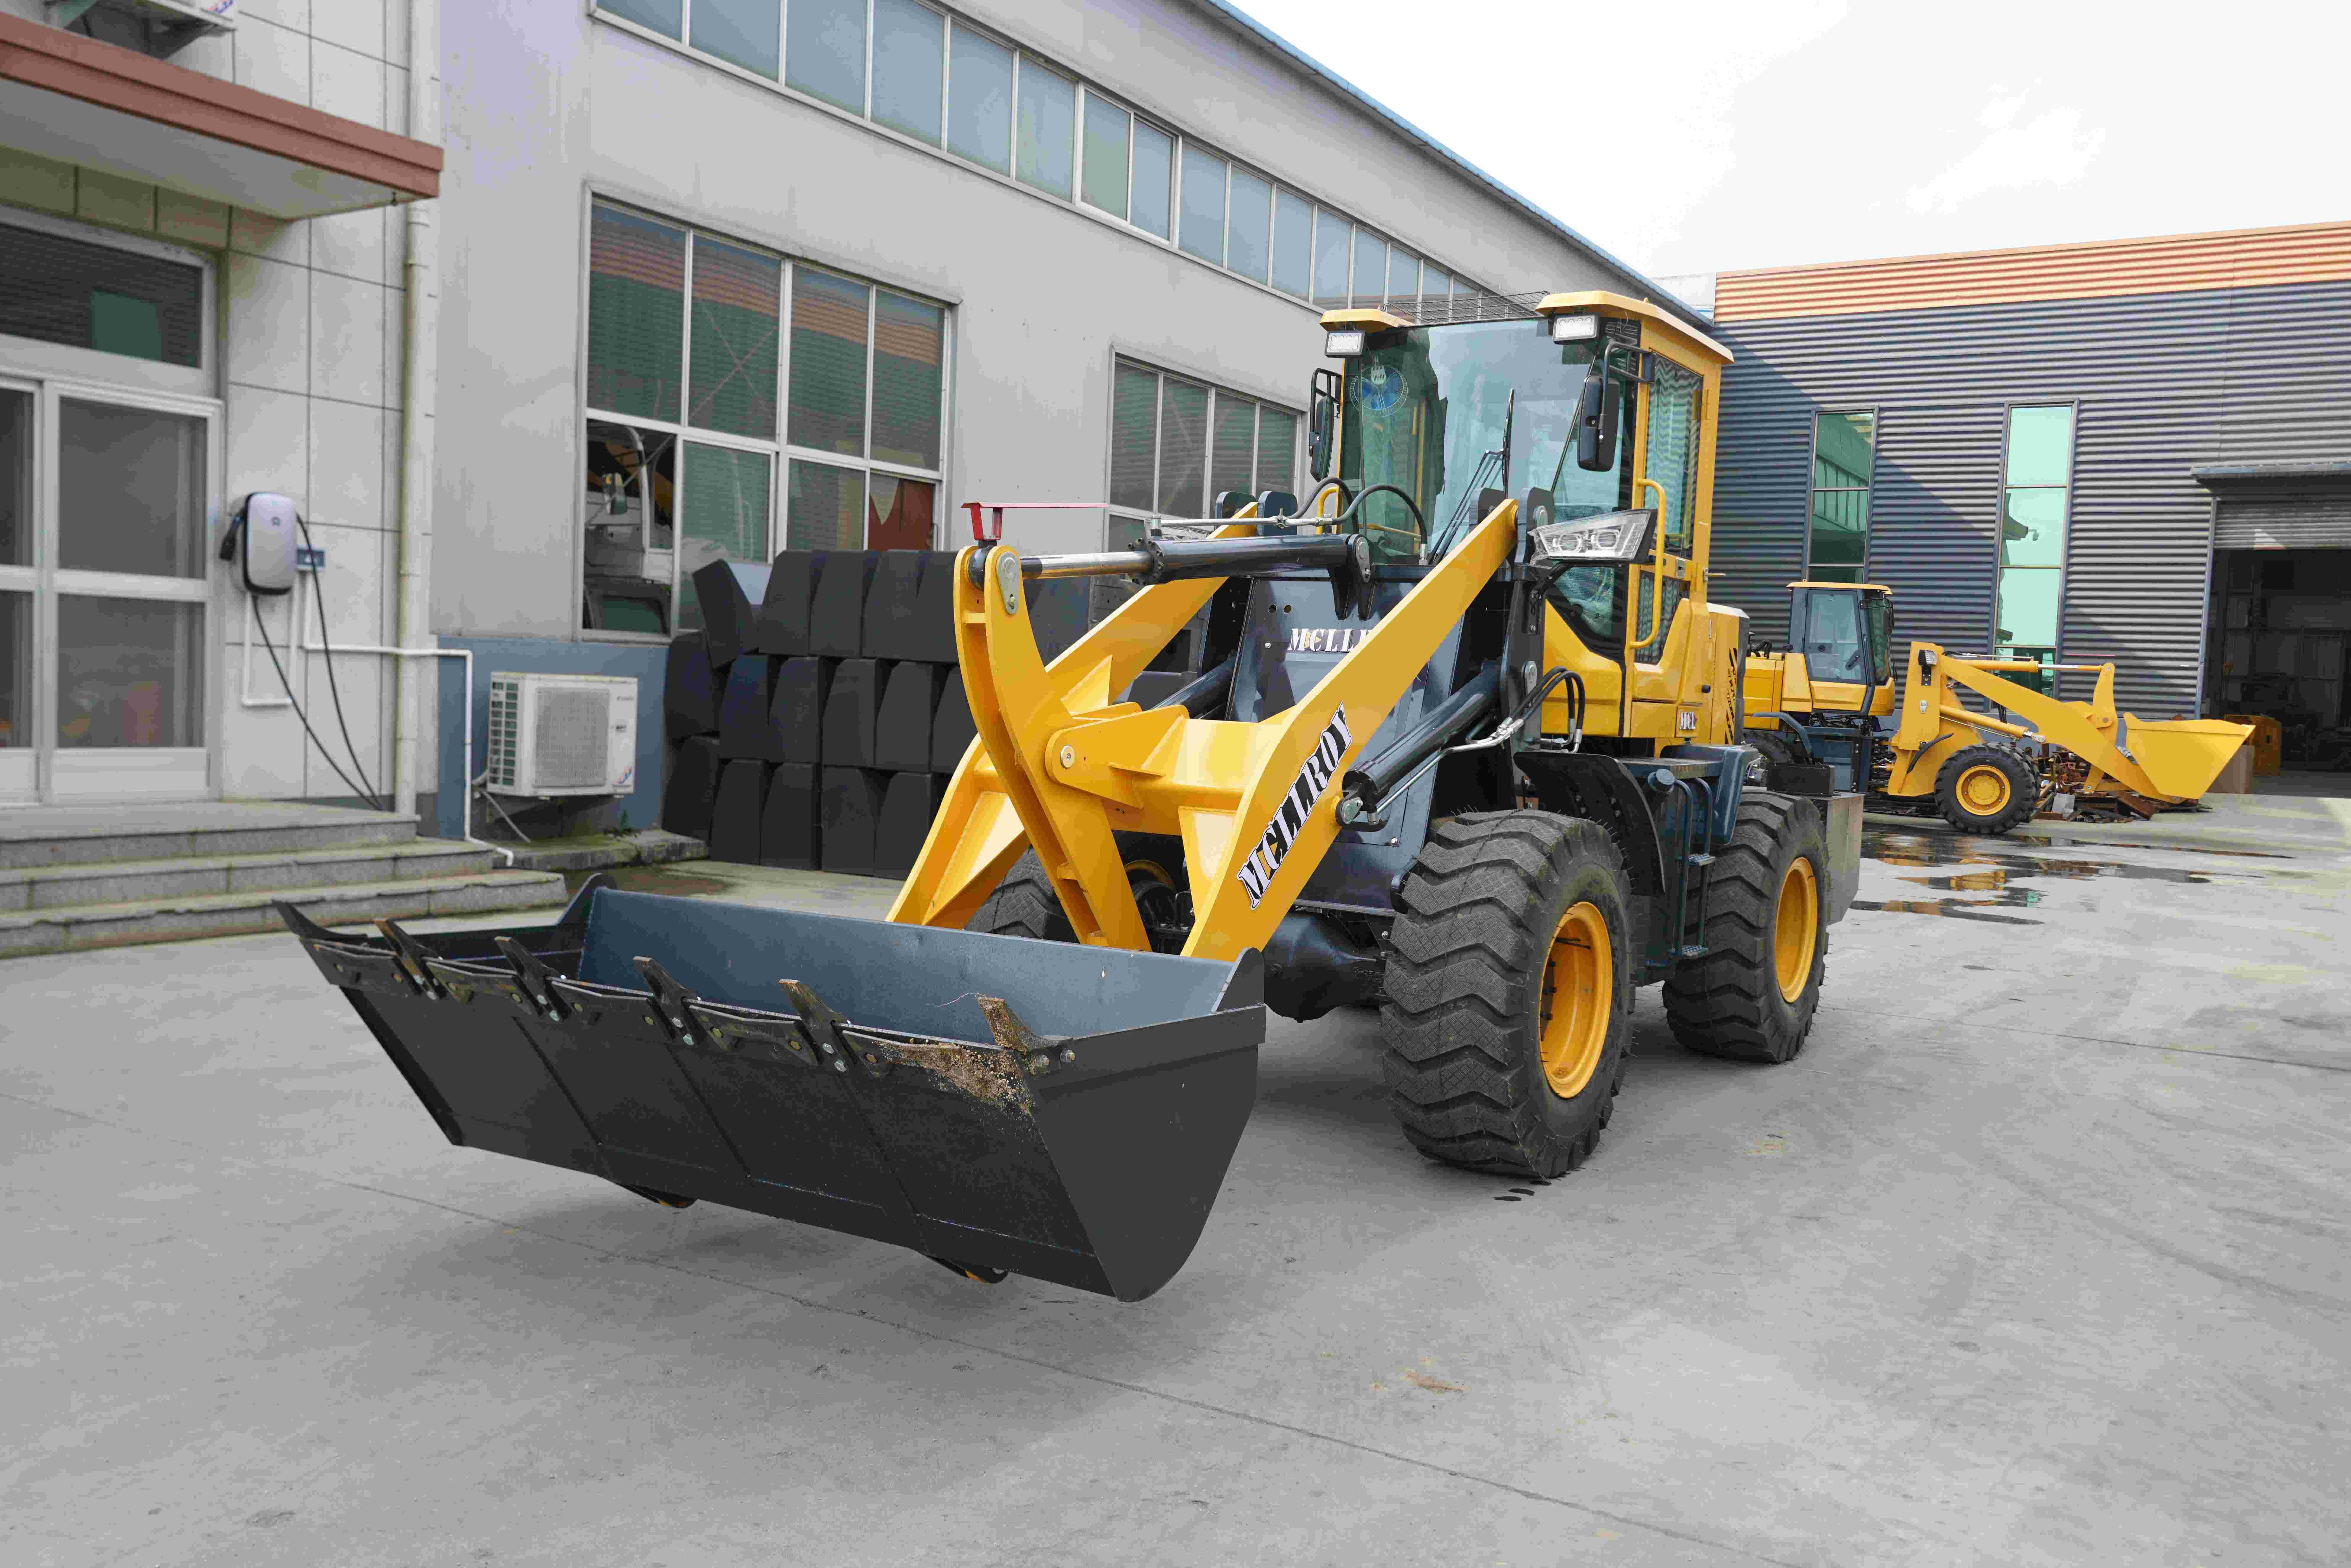 Construction Front Wheel Loader For Transporting 2700mm Axle Base 2400RPM